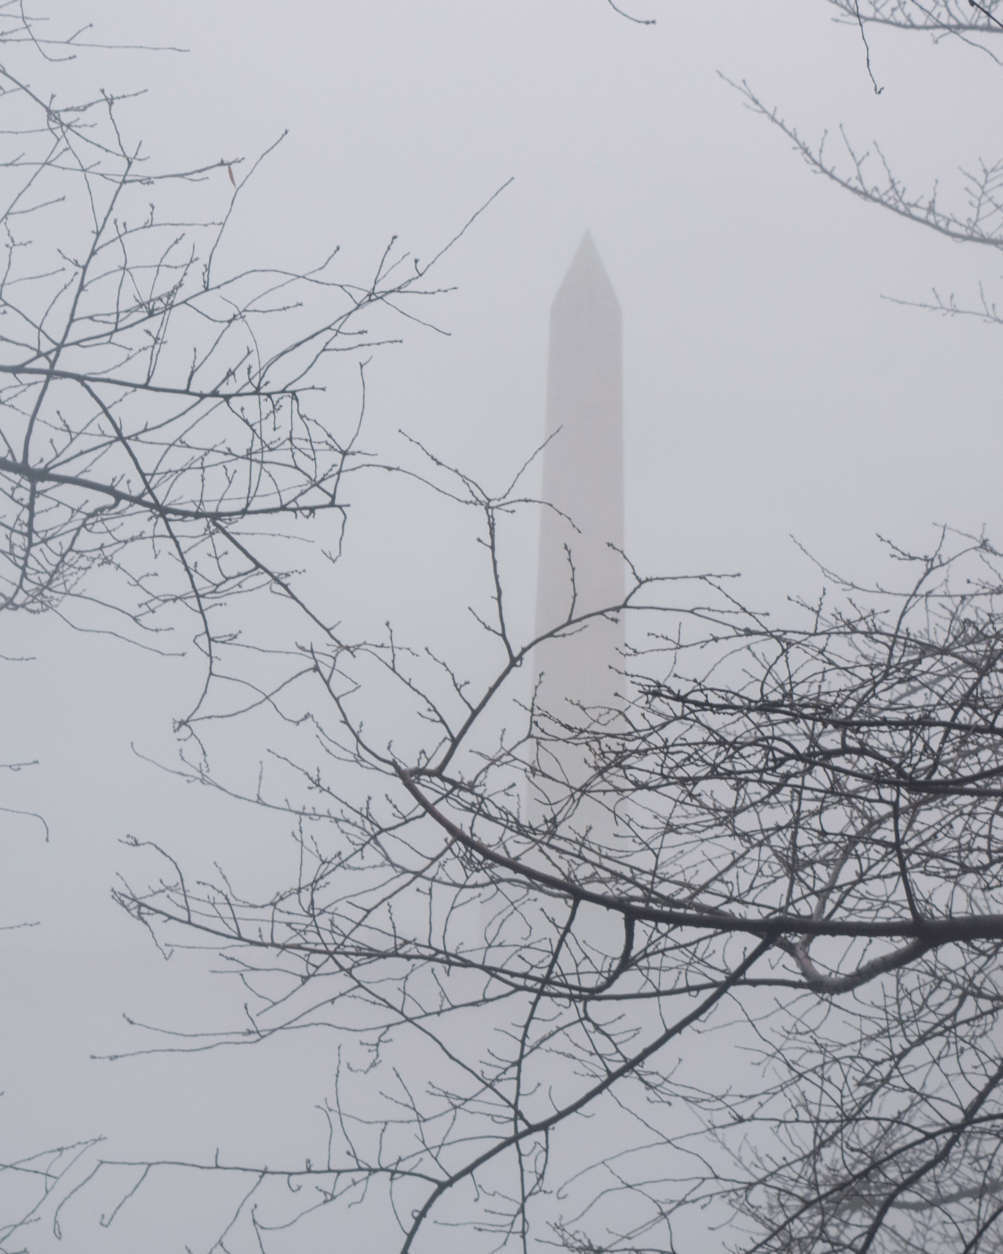 Fog shrouds the Washington Monument on Friday, Jan. 12, 2018. Mild temperatures mixing with cold air above the icy Potomac River created the heavy, ethereal fog. (WTOP/Carlos Prieto)